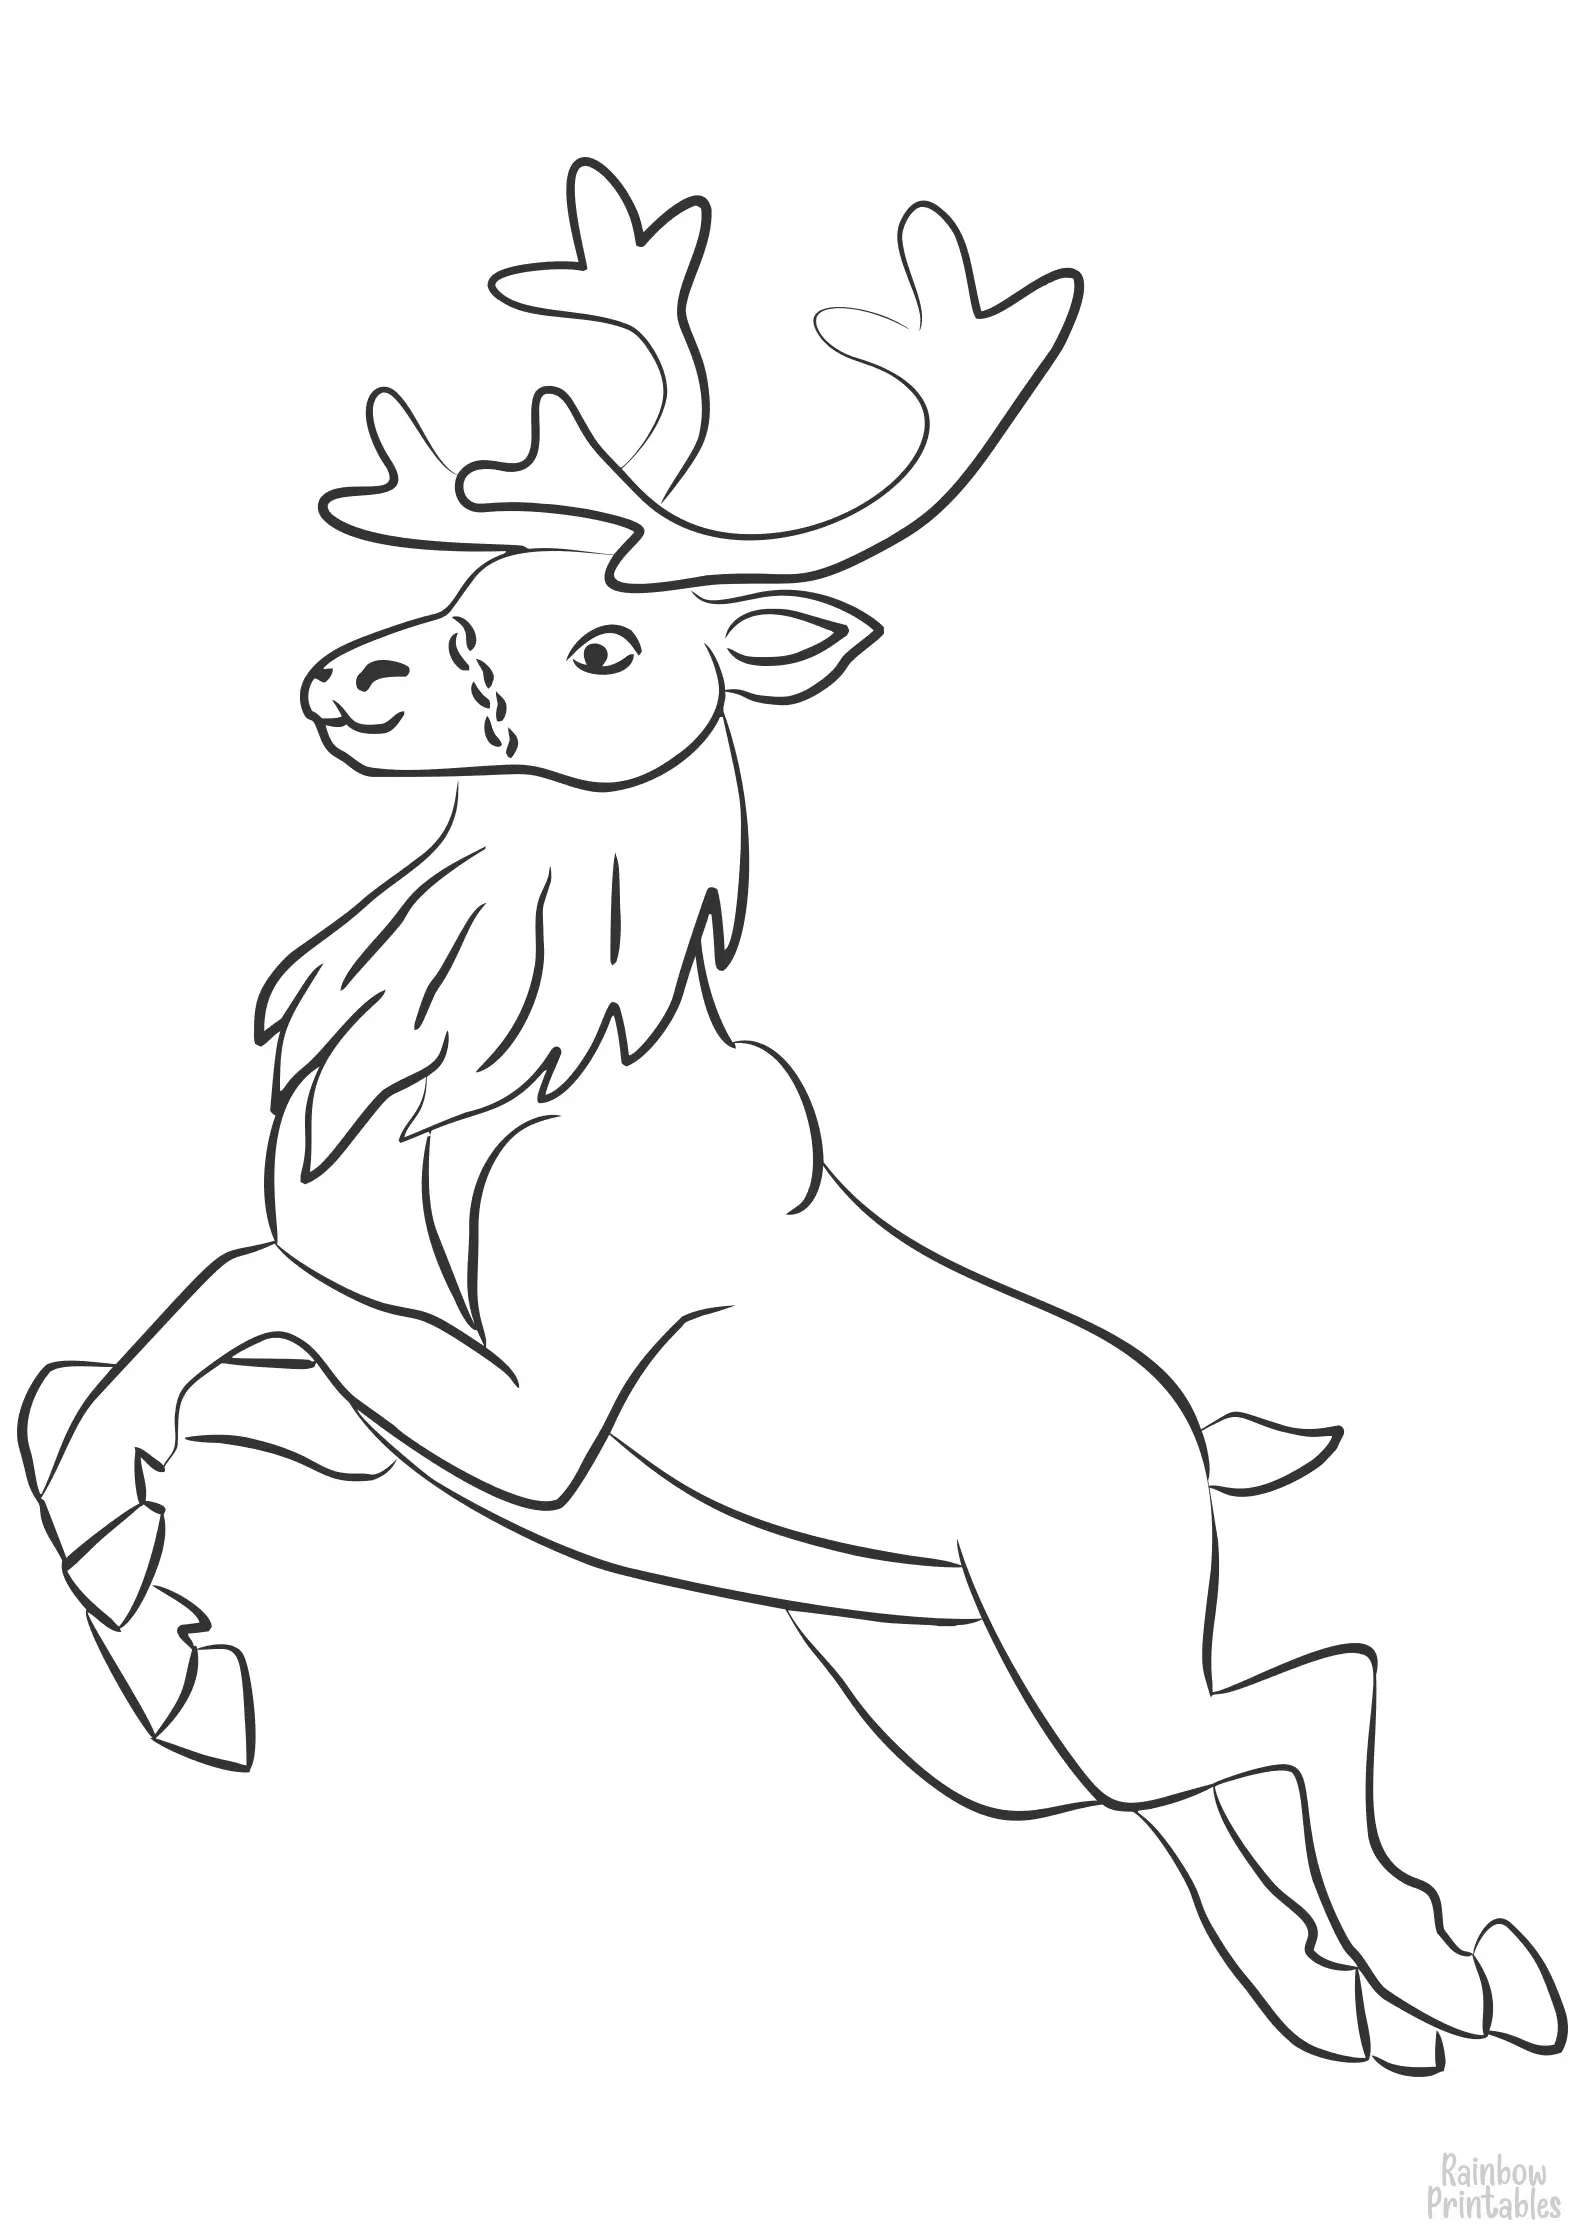 Simple Reindeer Coloring Page Christmas Xmas Coloring Activities for Kids